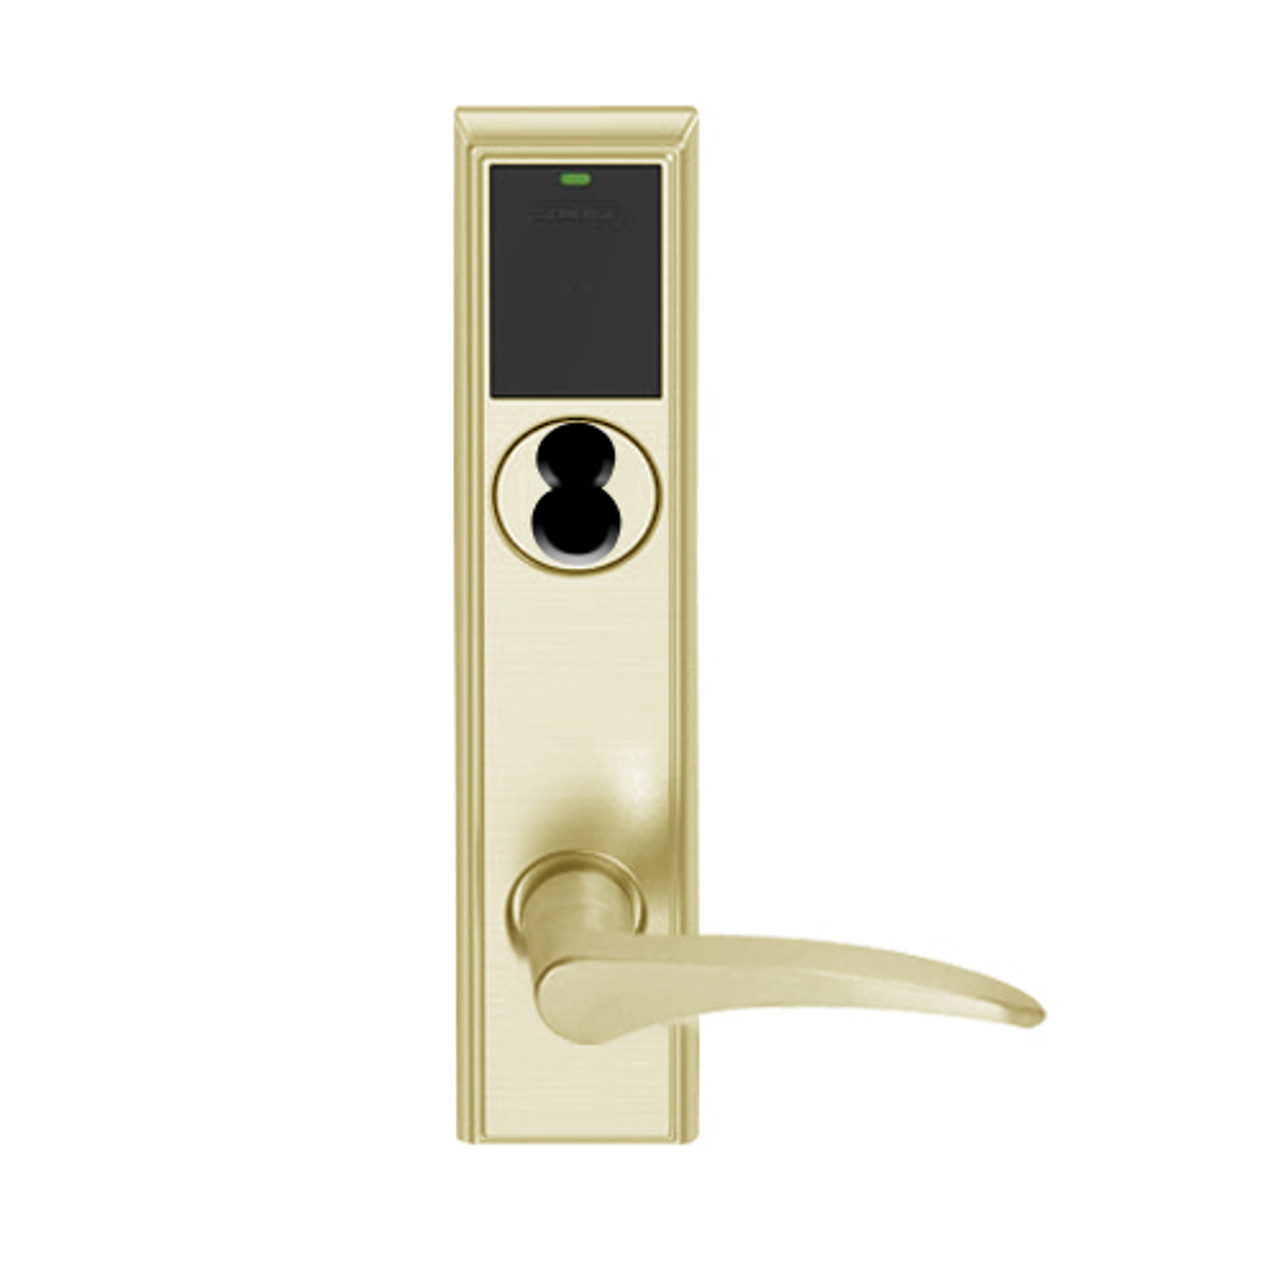 LEMS-ADD-BD-12-606-RH Schlage Storeroom Wireless Addison Mortise Lock with LED and 12 Lever Prepped for SFIC in Satin Brass